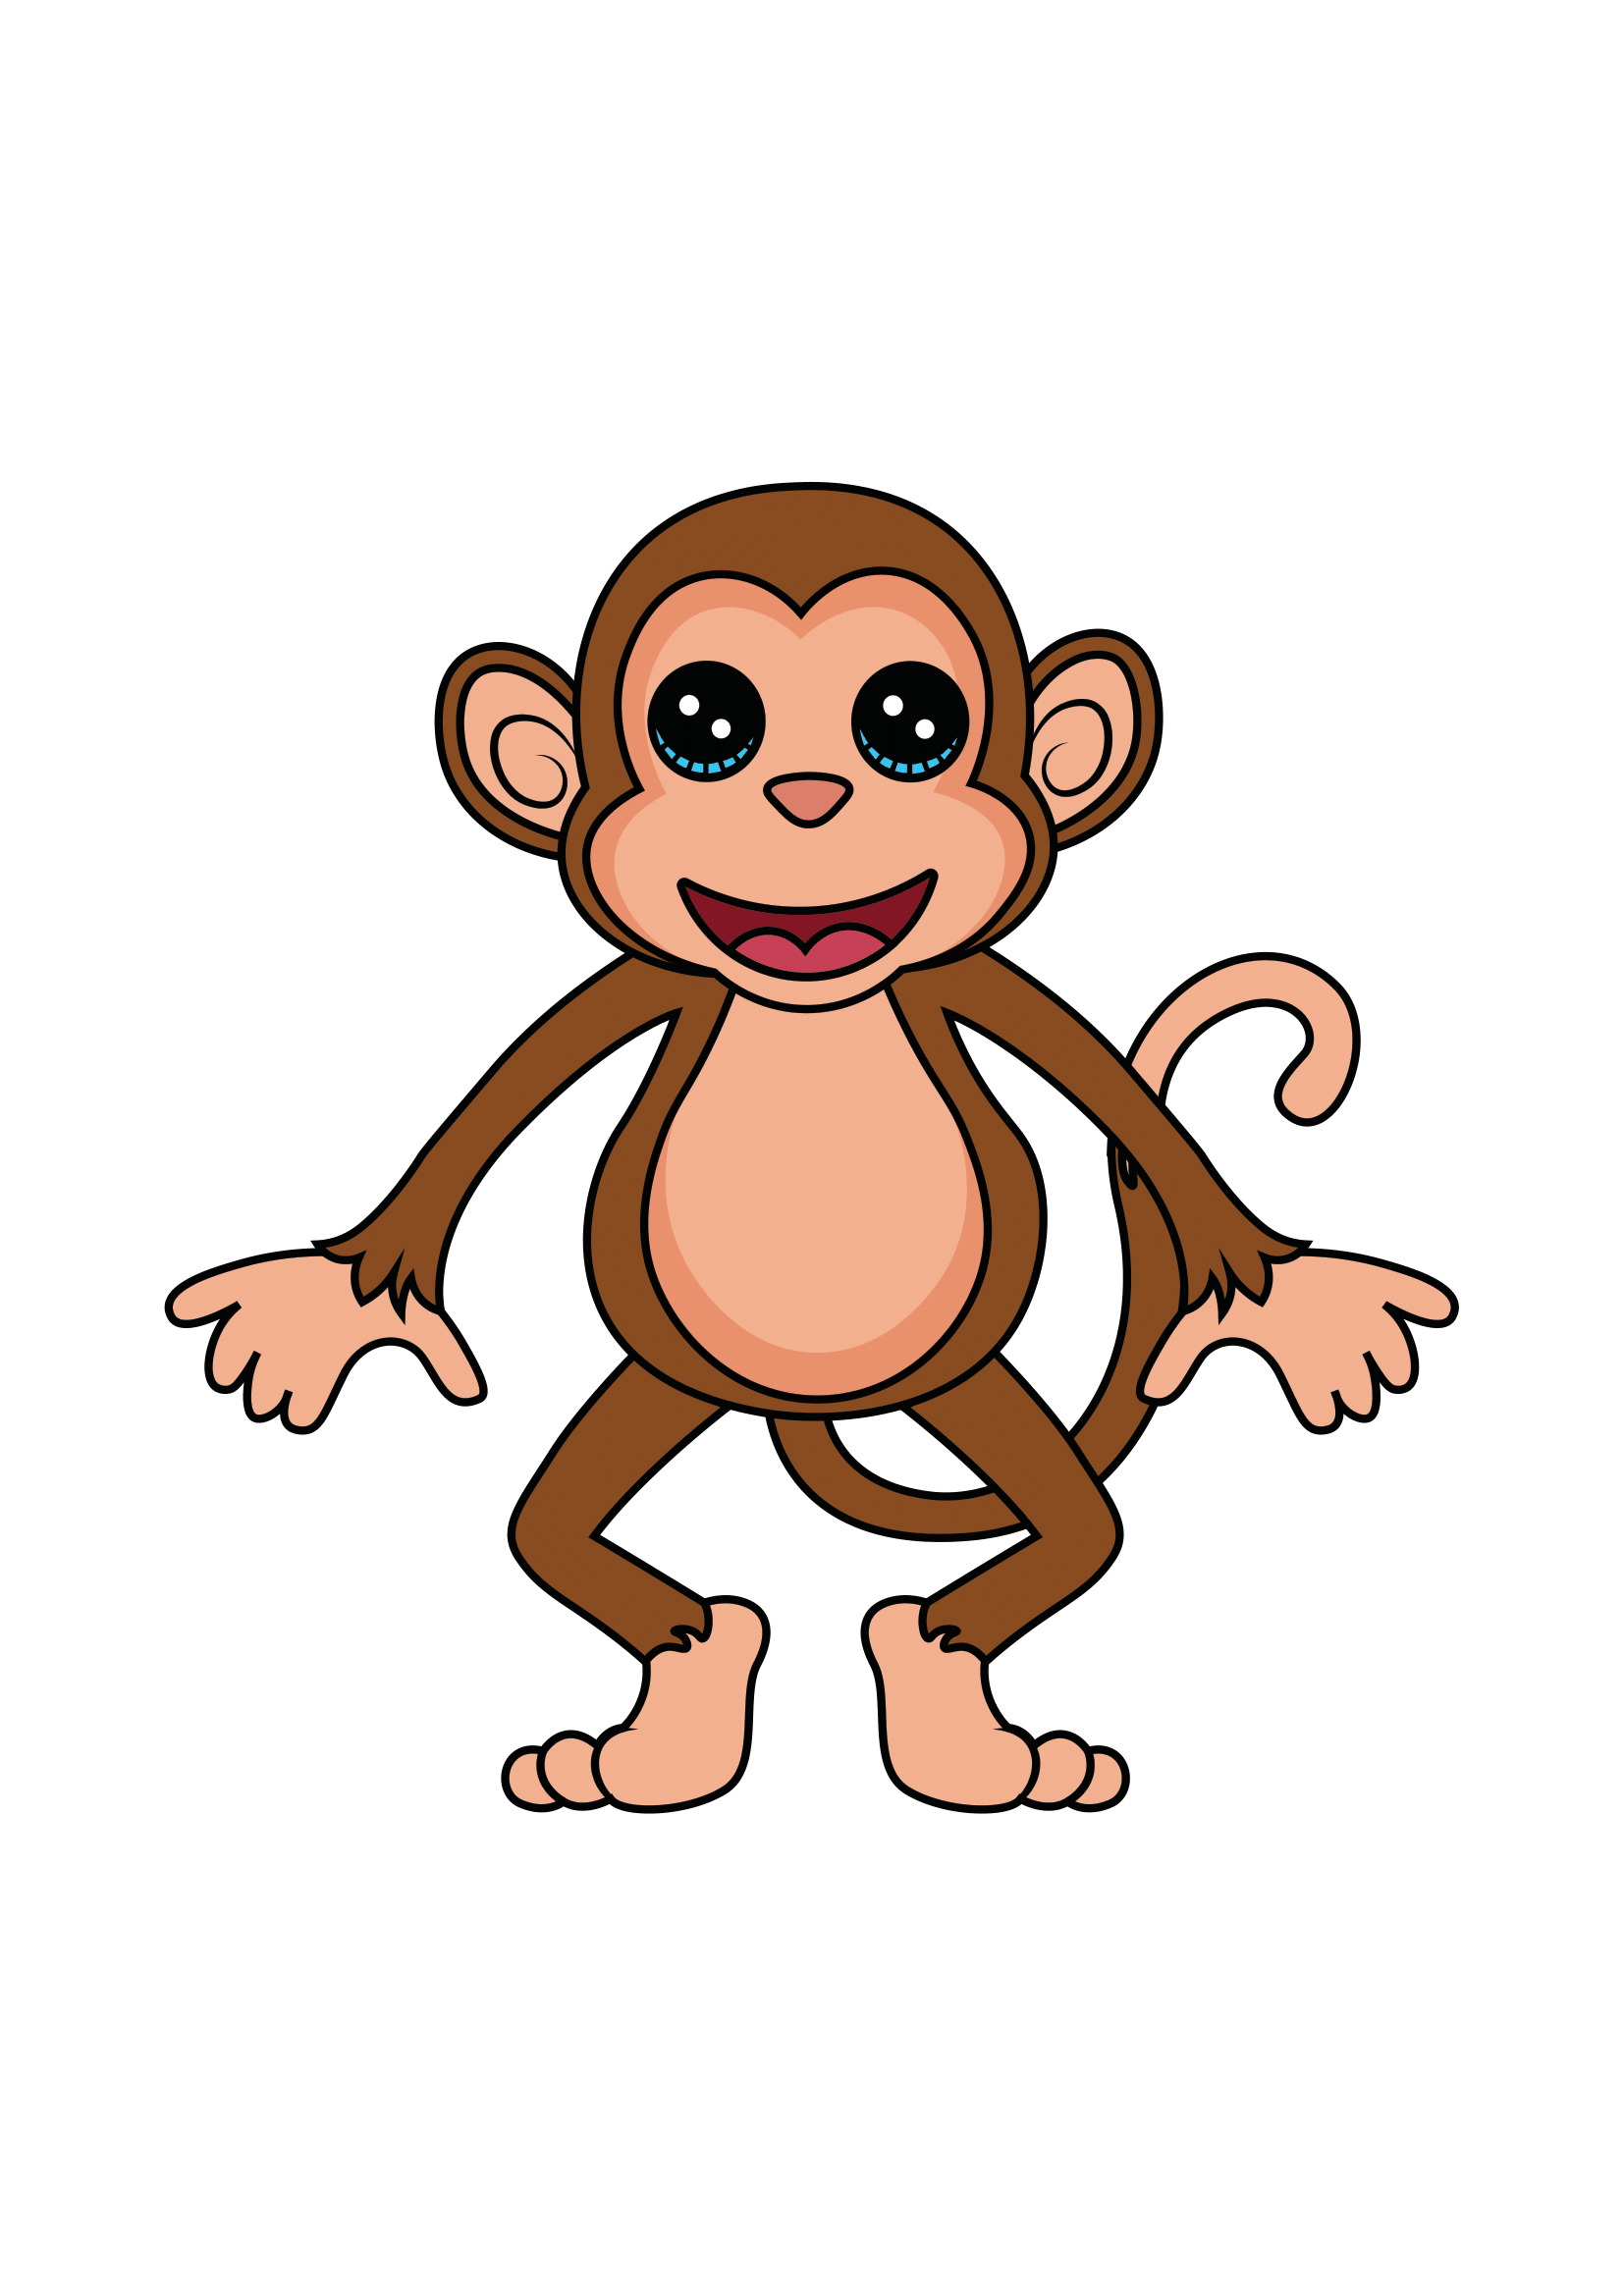 How to Draw A Monkey Step by Step Printable